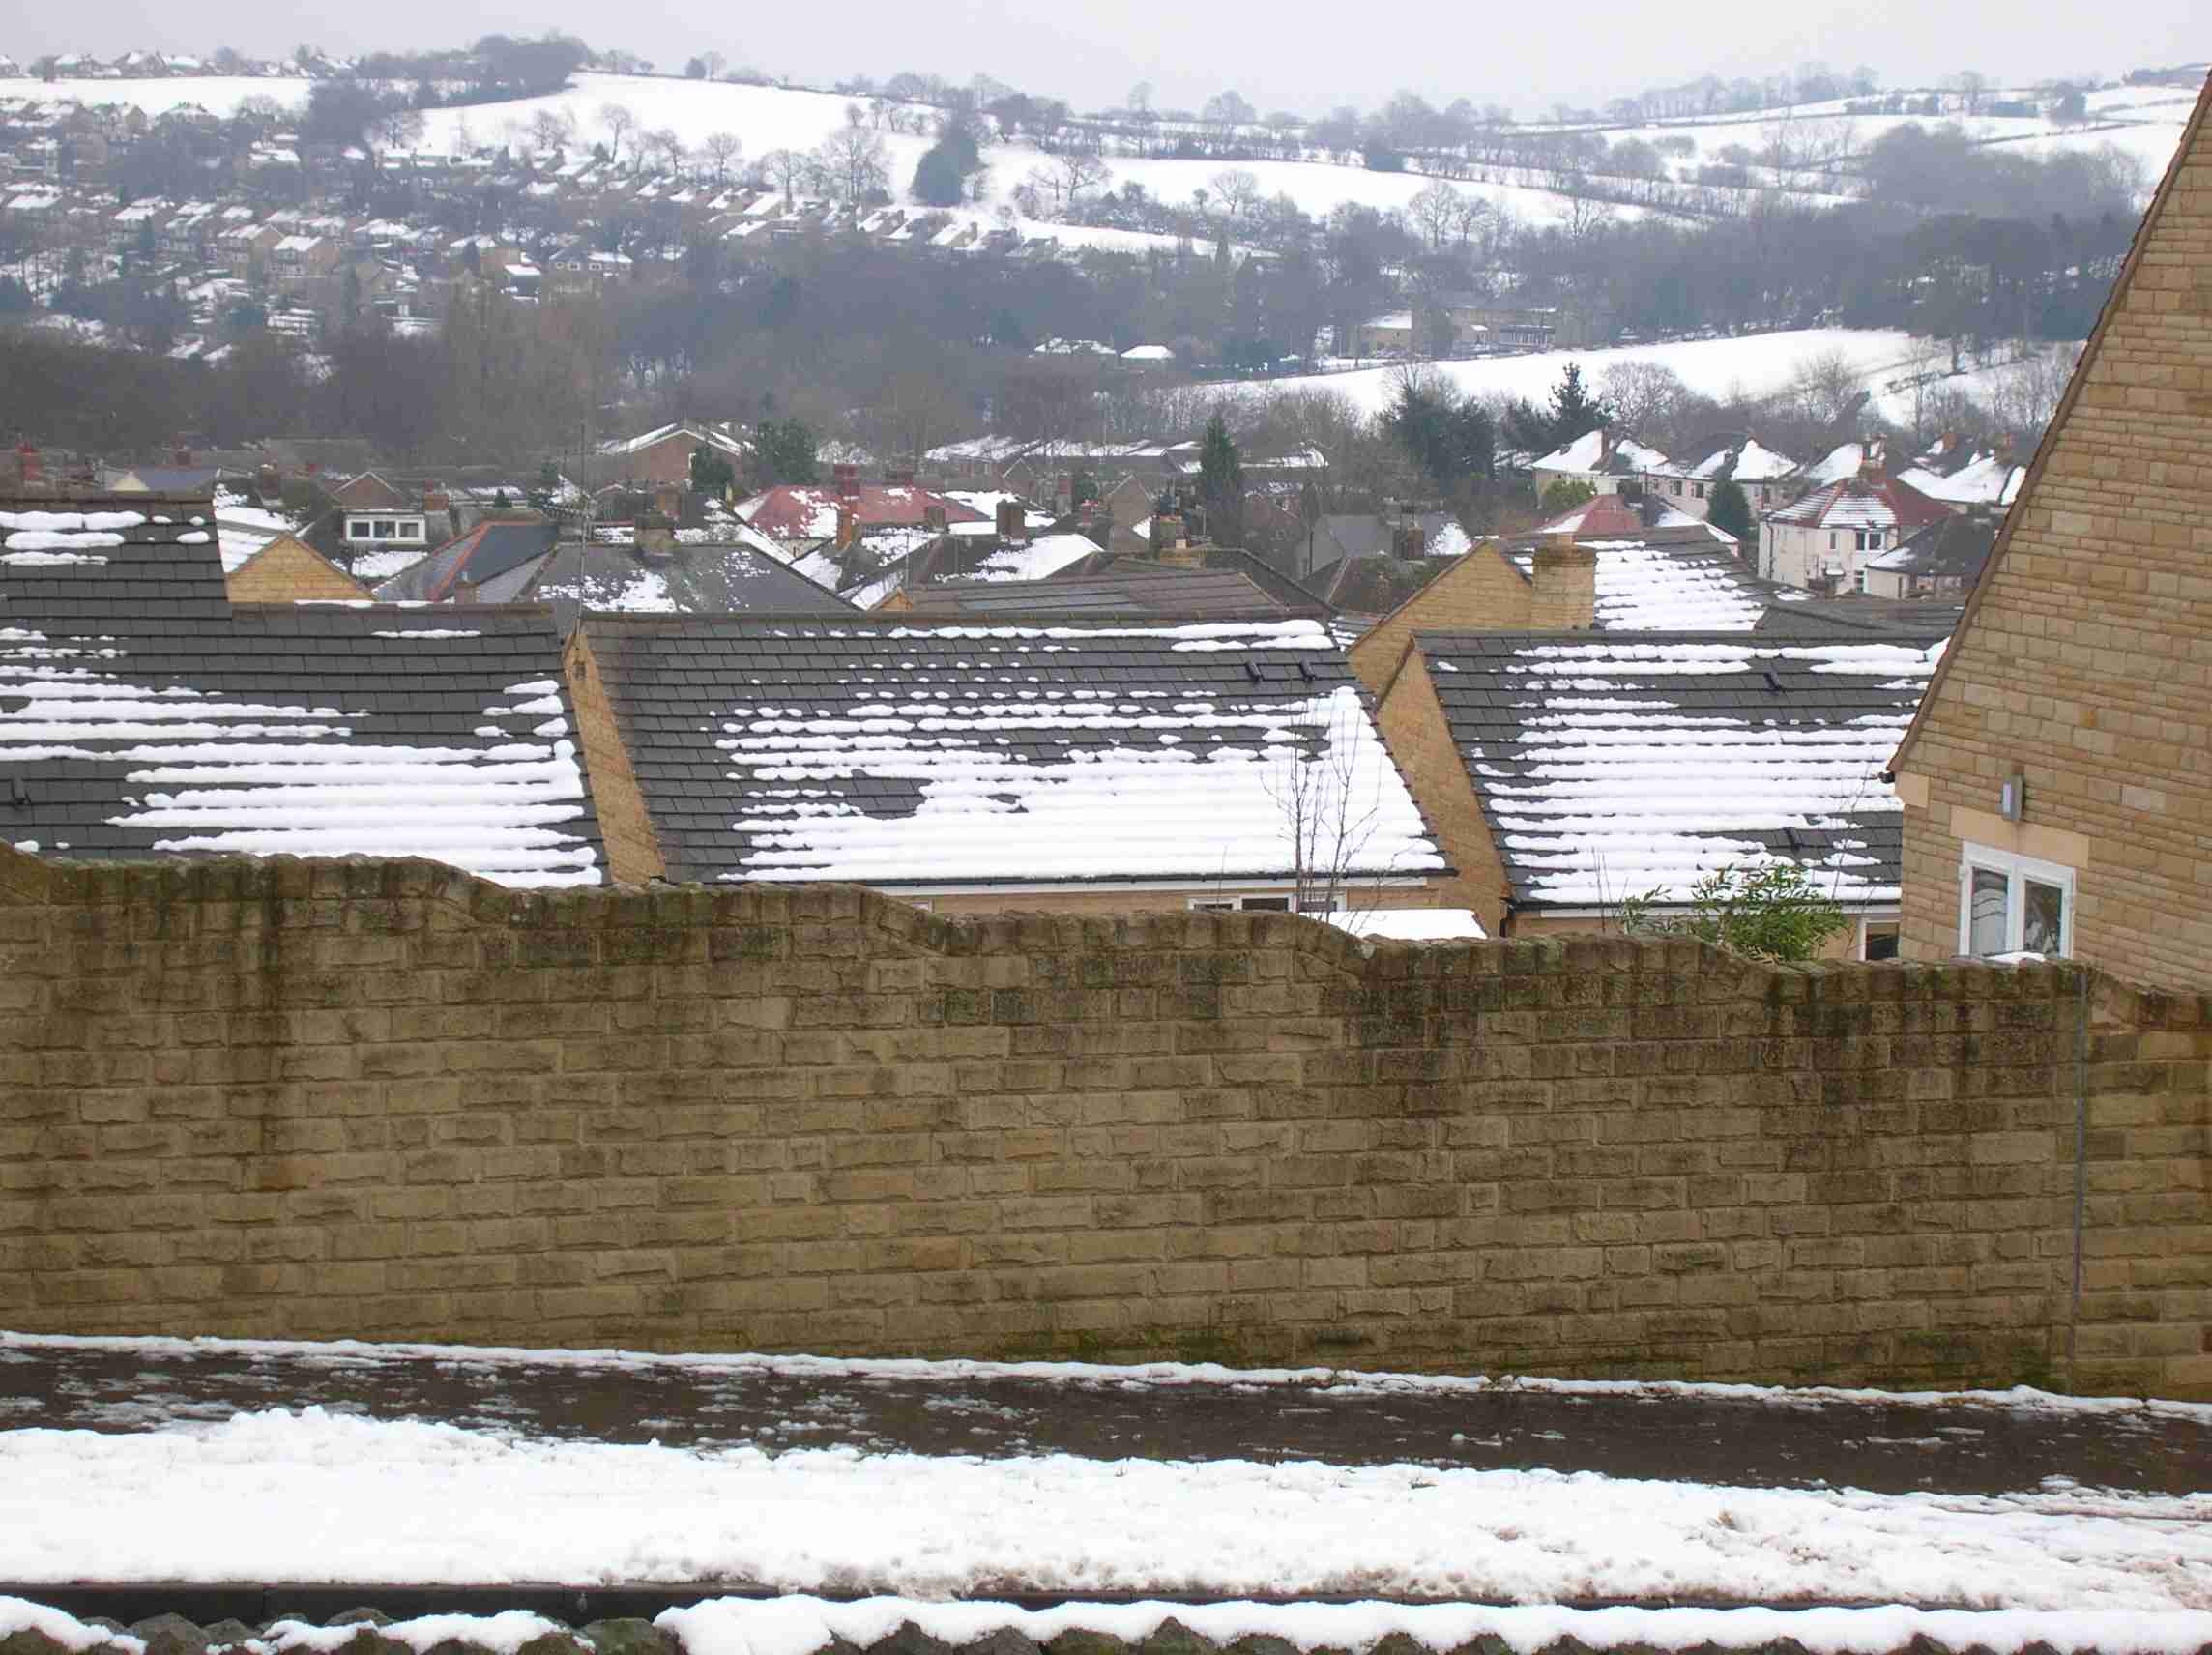 Looking from the garden of TOTLEY HALL across the roofs of TOTLEY HALL ESTATE towards BRADWAY